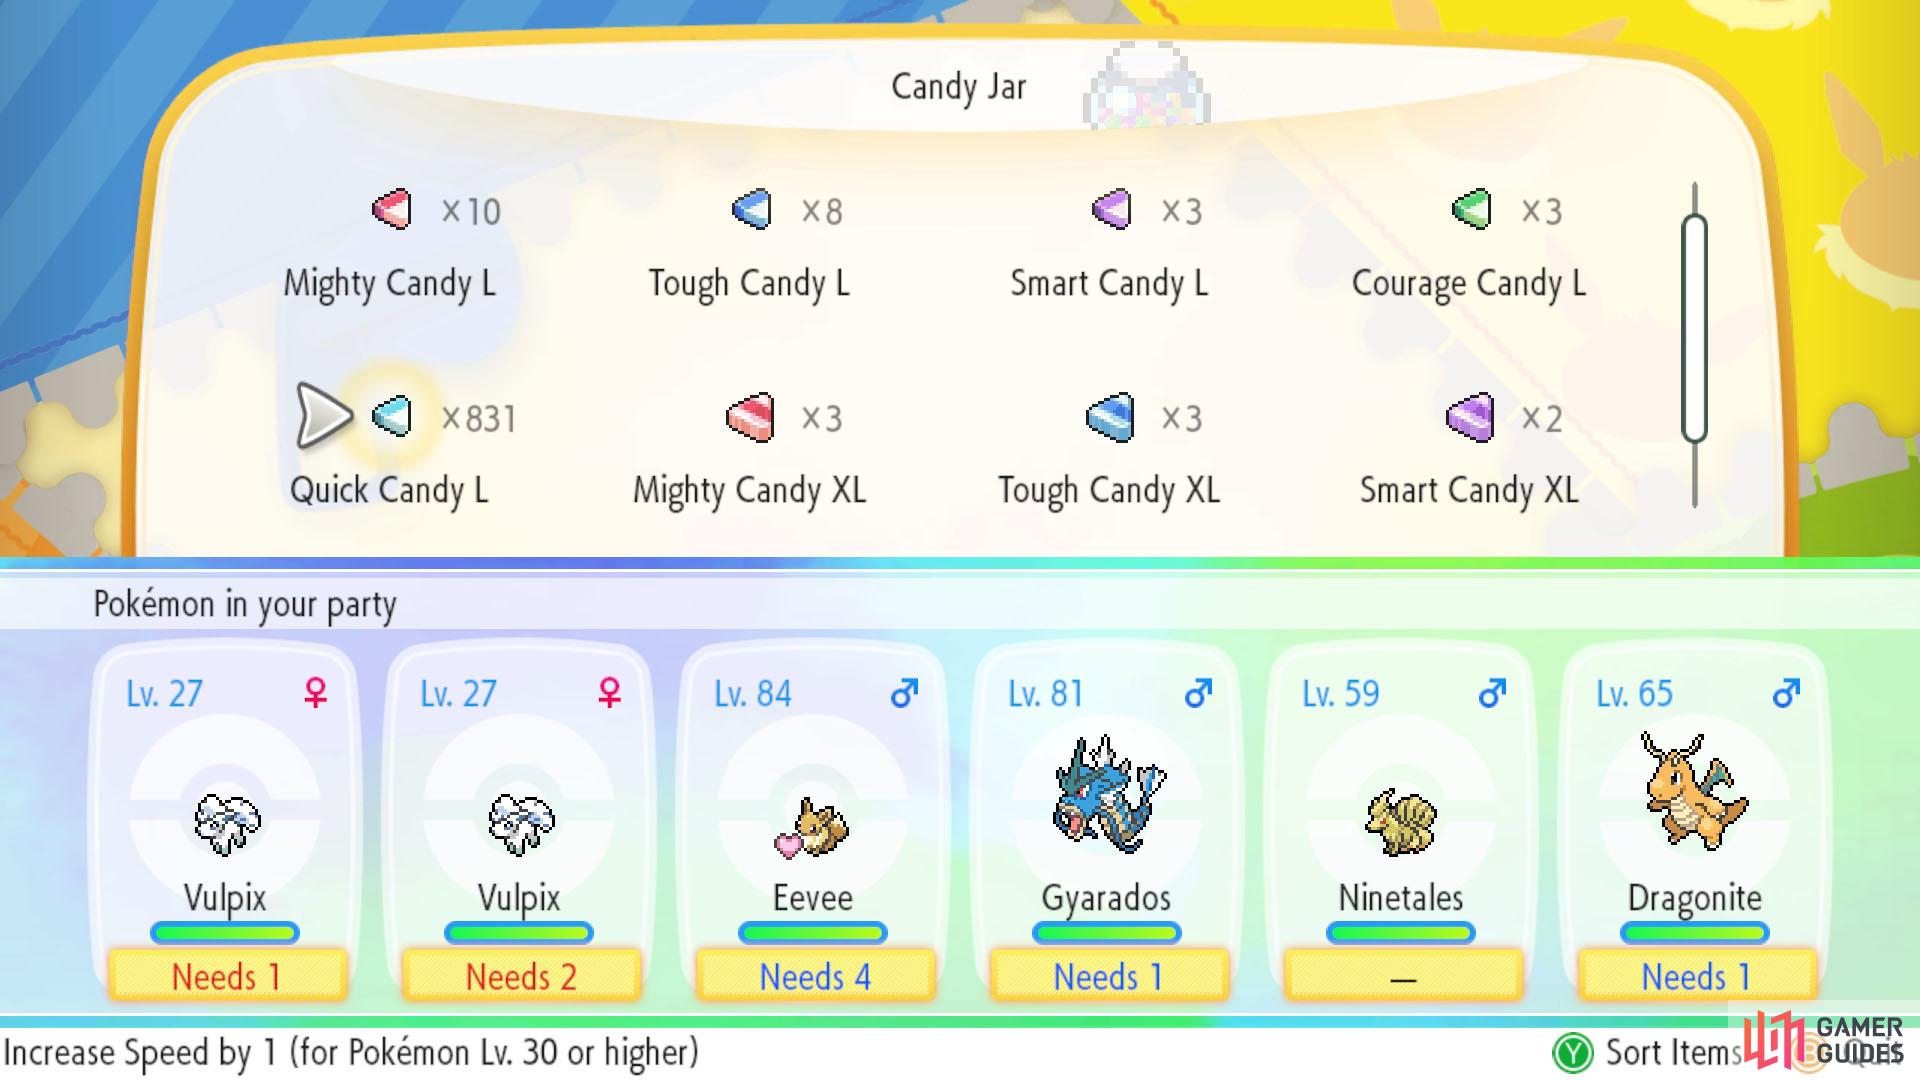 Standard candy be used on any Pokémon (ignoring Level and AV restrictions).